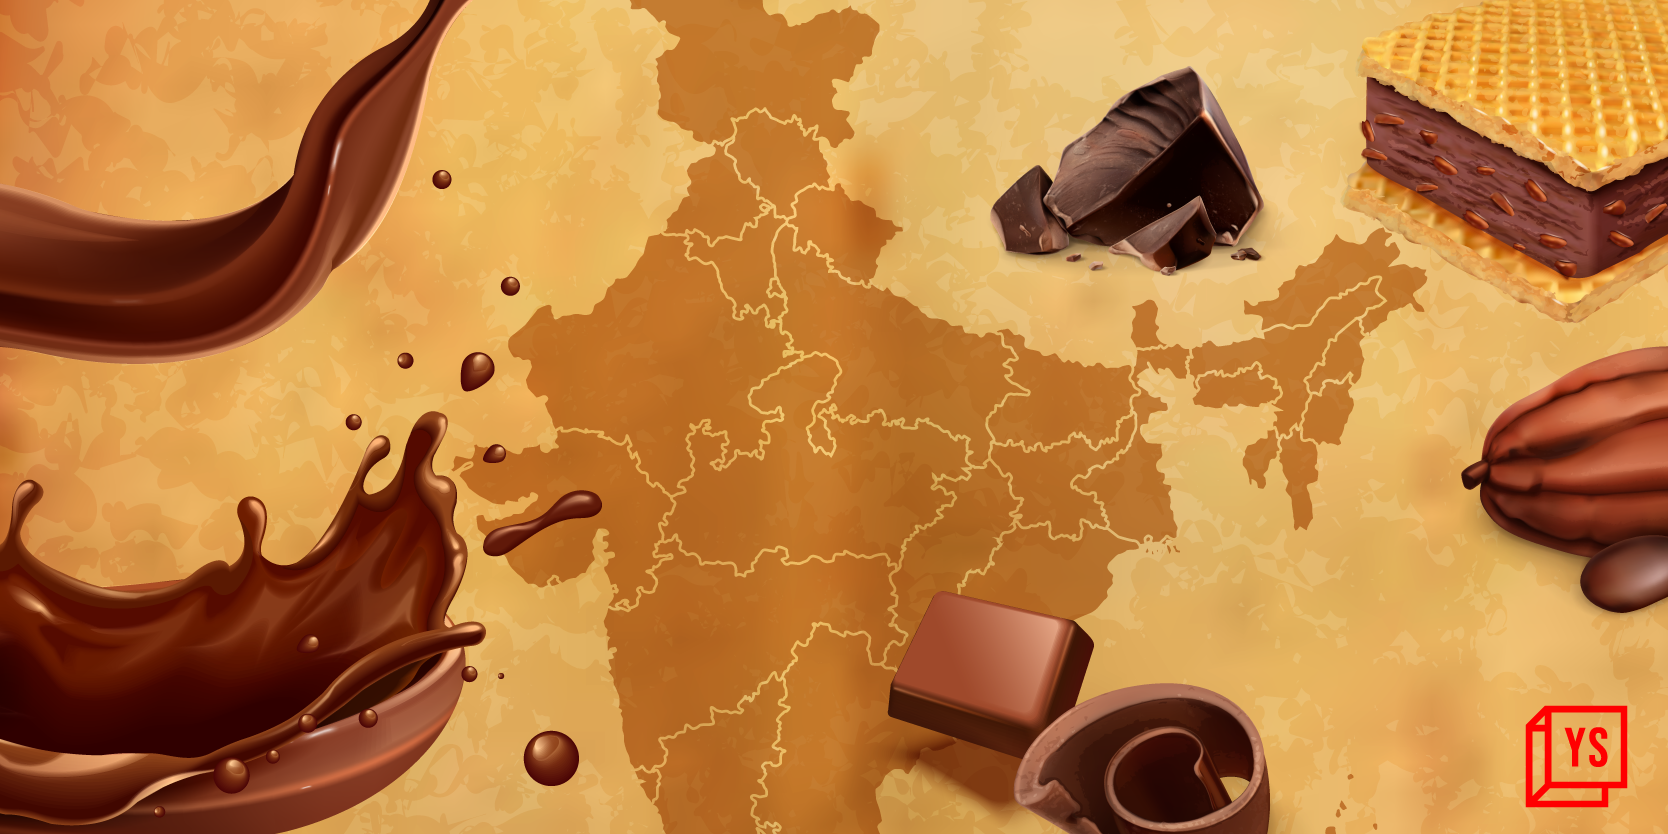 Mars Wrigley wants Bharat to indulge in more Snickers and Galaxy